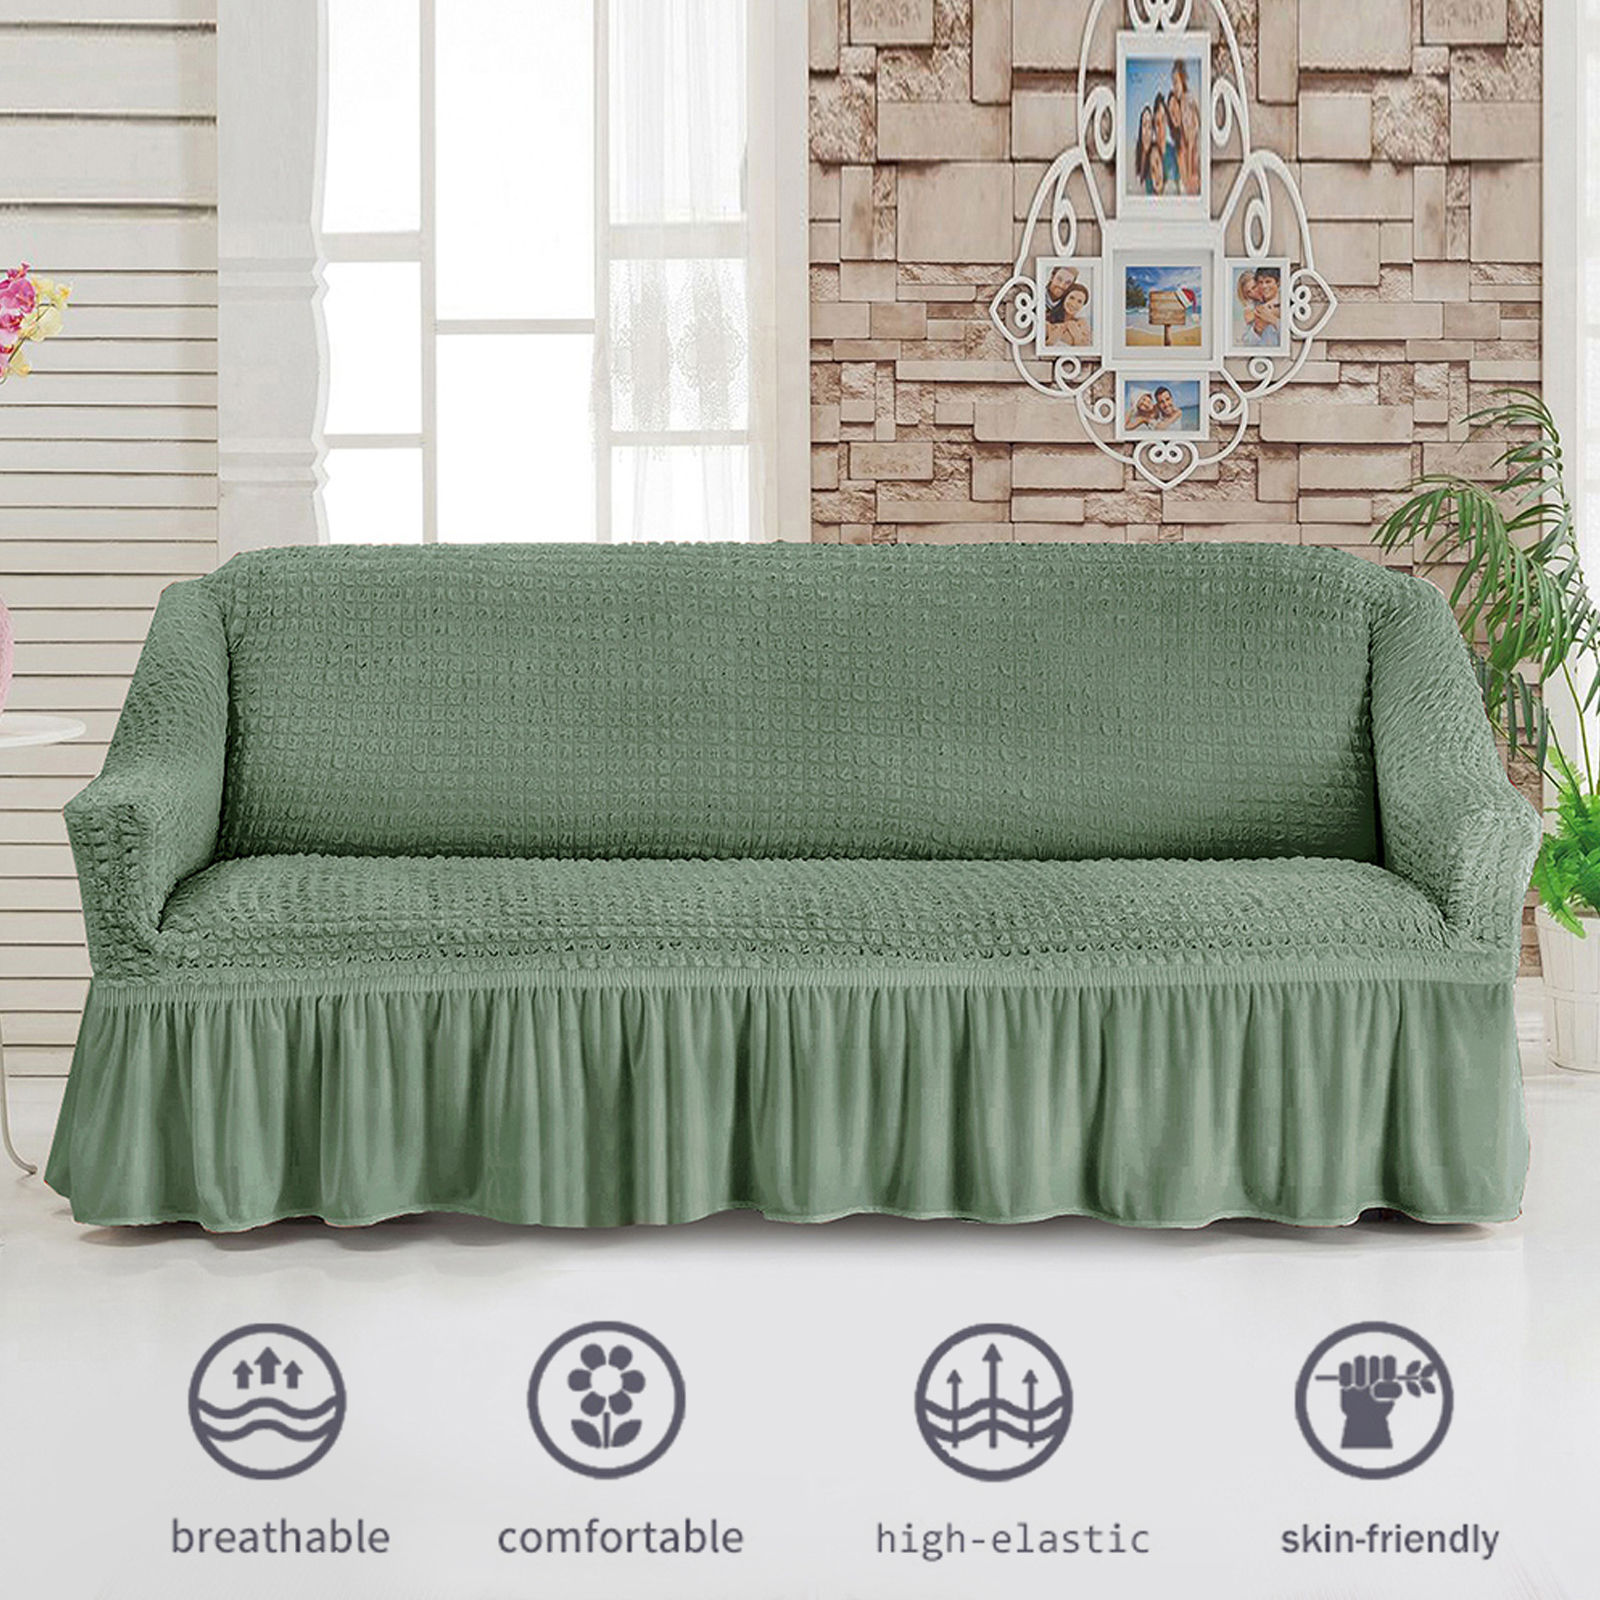 Stretch Sofa Slipcover, 3 Seater Sofa Slipcovers With Skirt With Armless Soft Sofa Cover Elastic Straps Sofa Slipcover For Living Room Kids Pets-Green B-X-Large